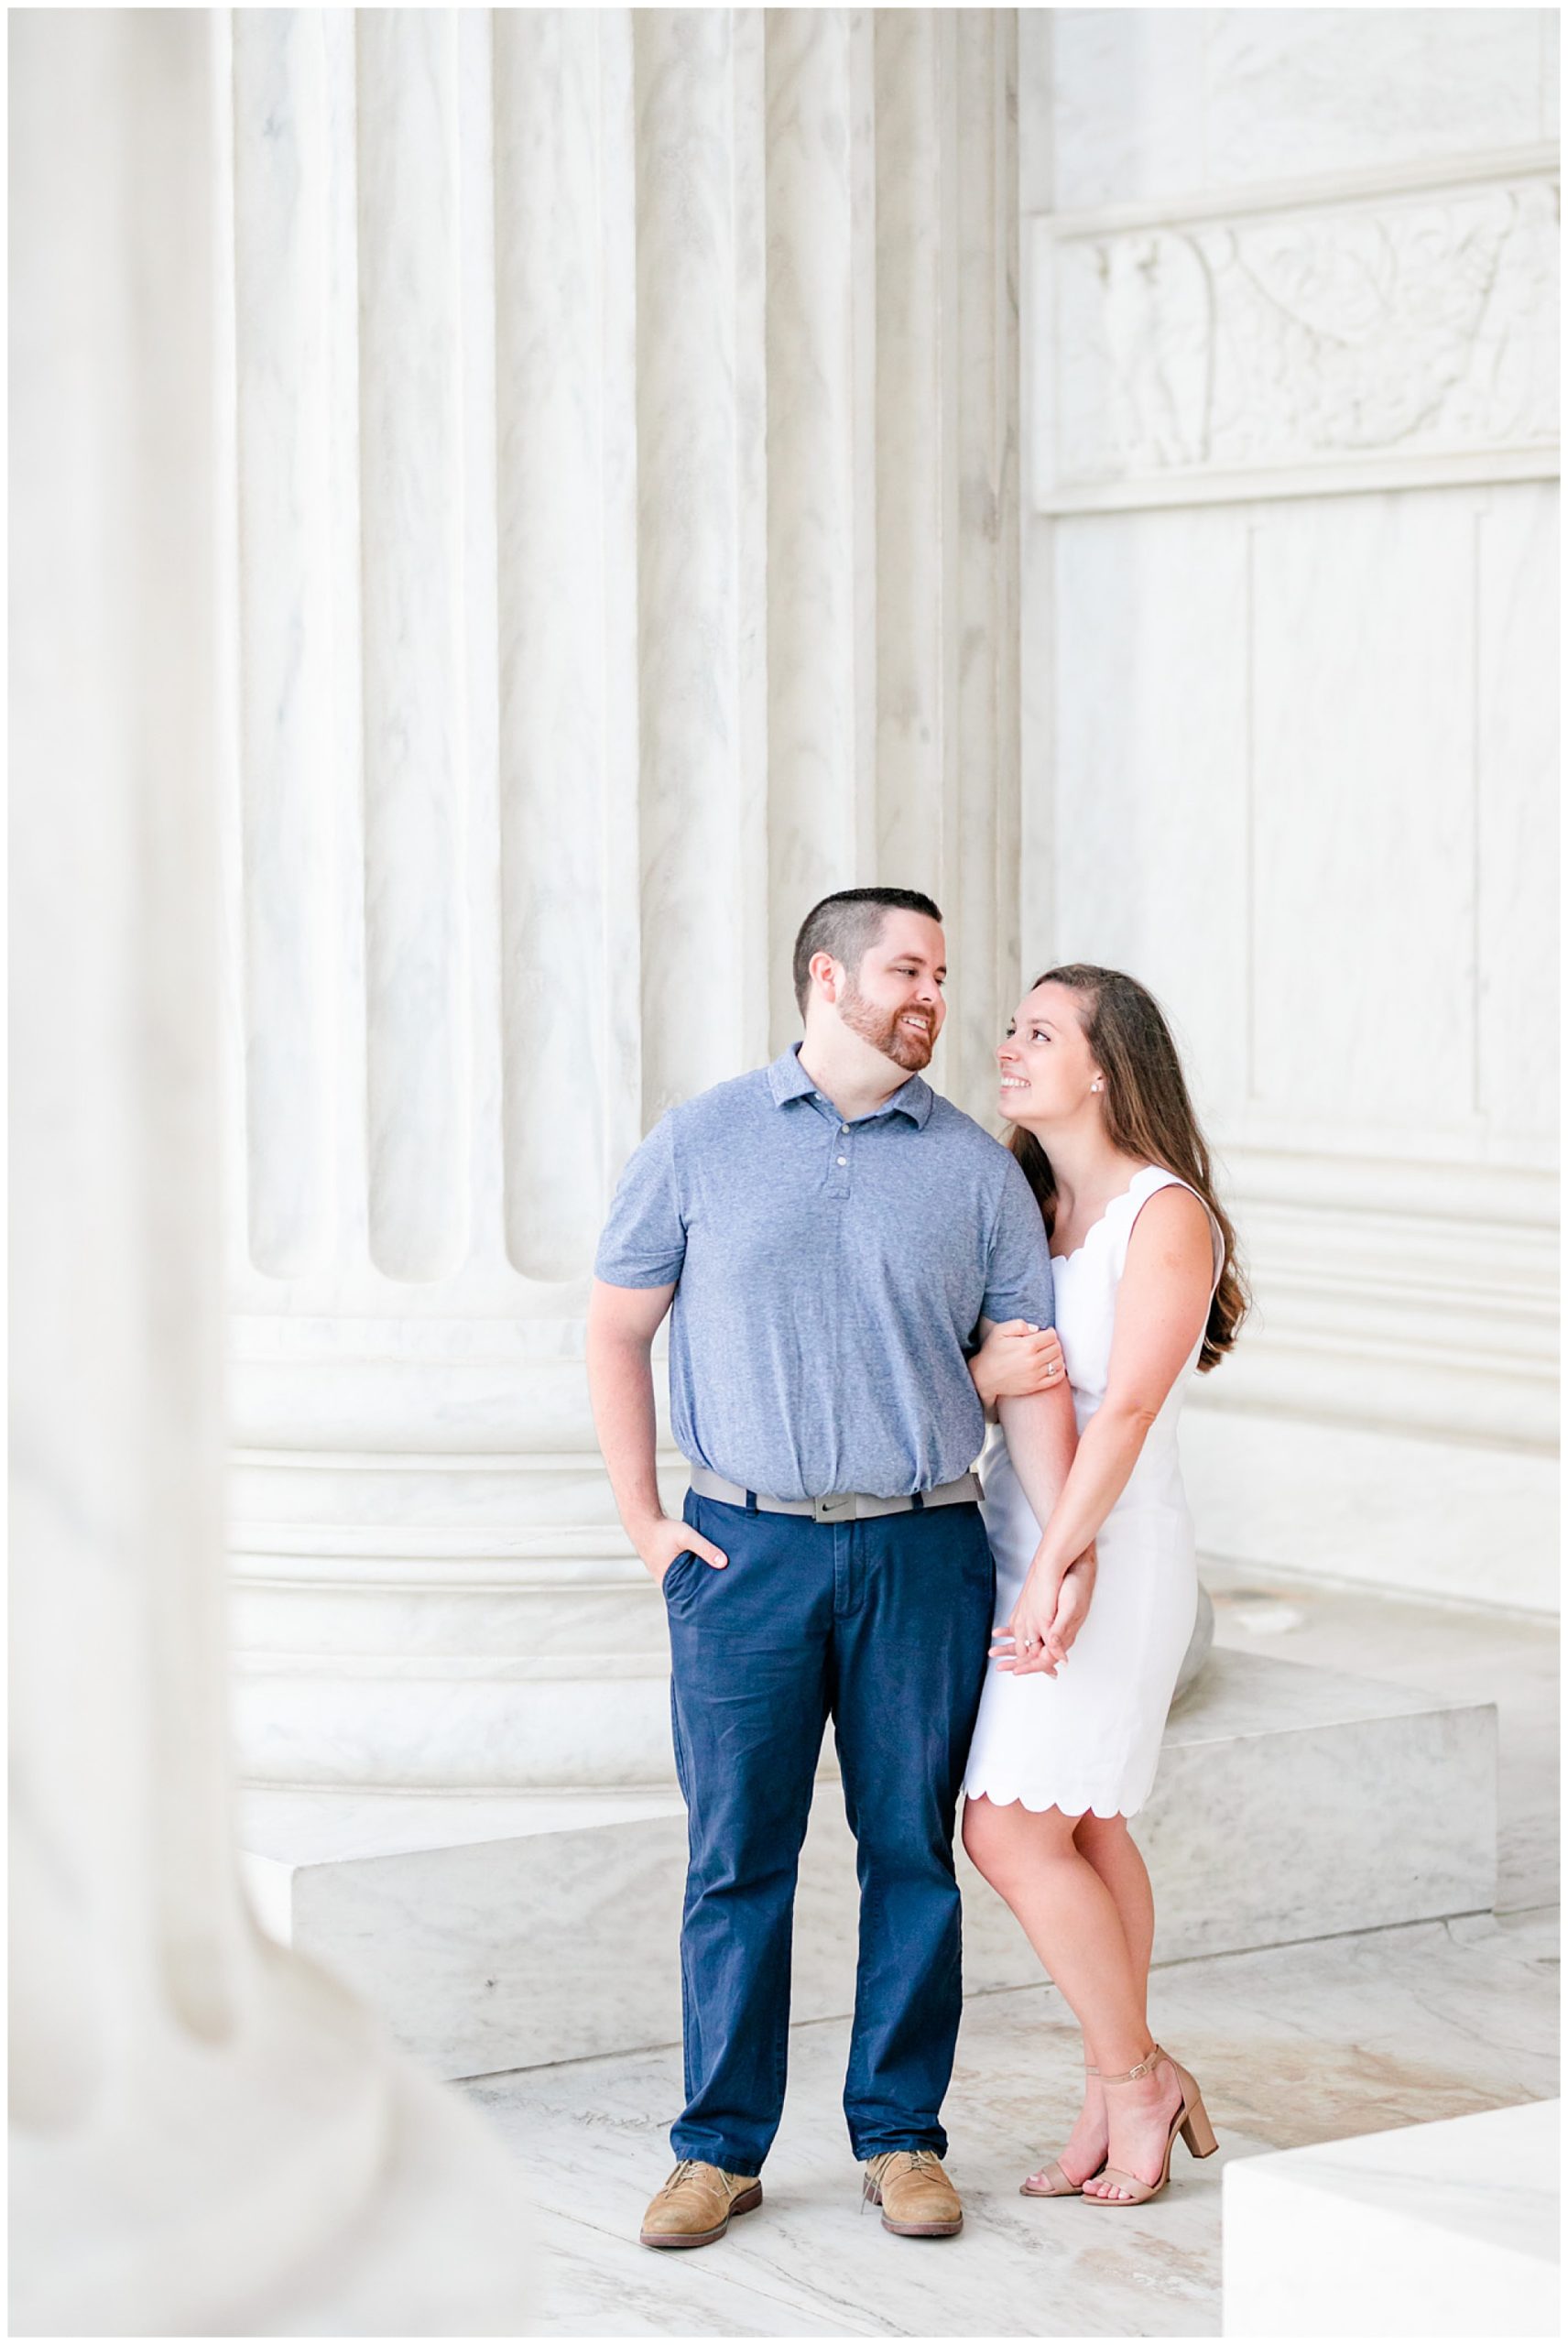 Capitol Hill engagement session, Capitol Hill portraits, D.C. engagement photography, D.C. engagement photographer, D.C. Capitol Hill D.C., DC photography, engagement photography, Rachel E.H. Photography, classic engagement photos, spring engagement photos, Supreme Court, casual white dress